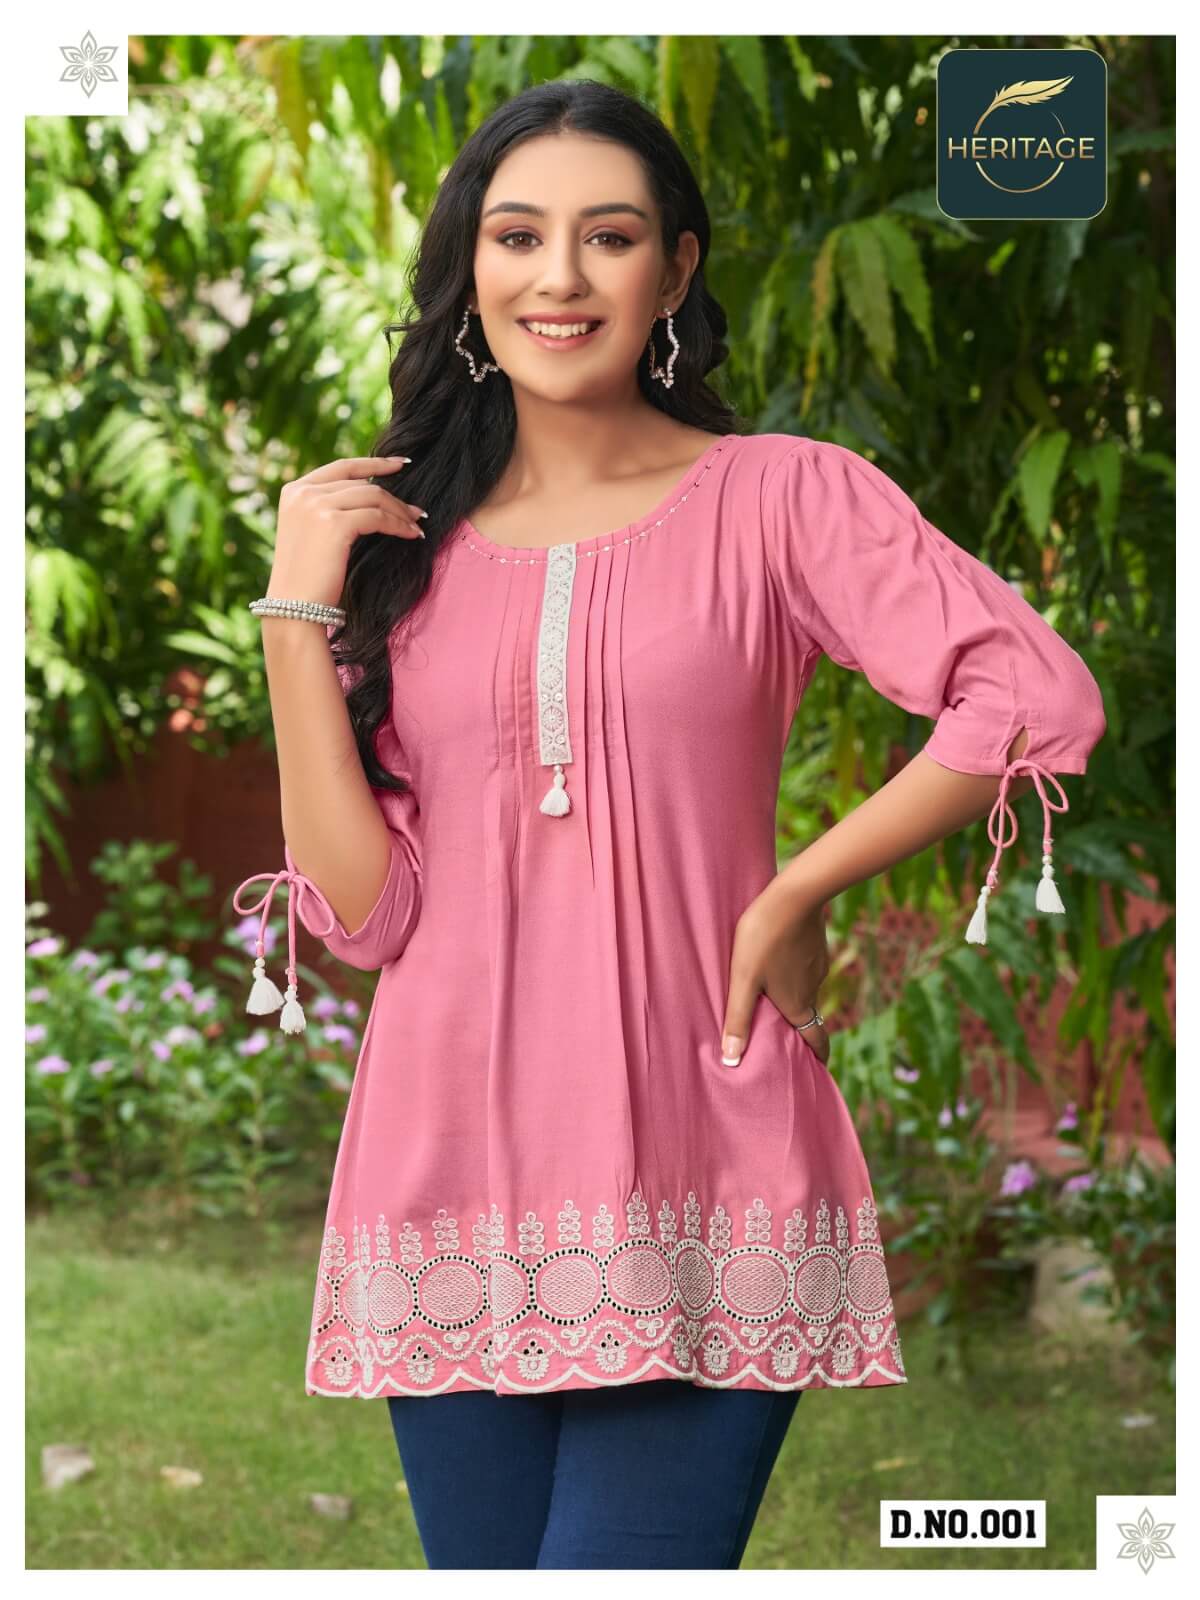 Heritage Cherry Rayon Ladies Tops Catalog collection 1